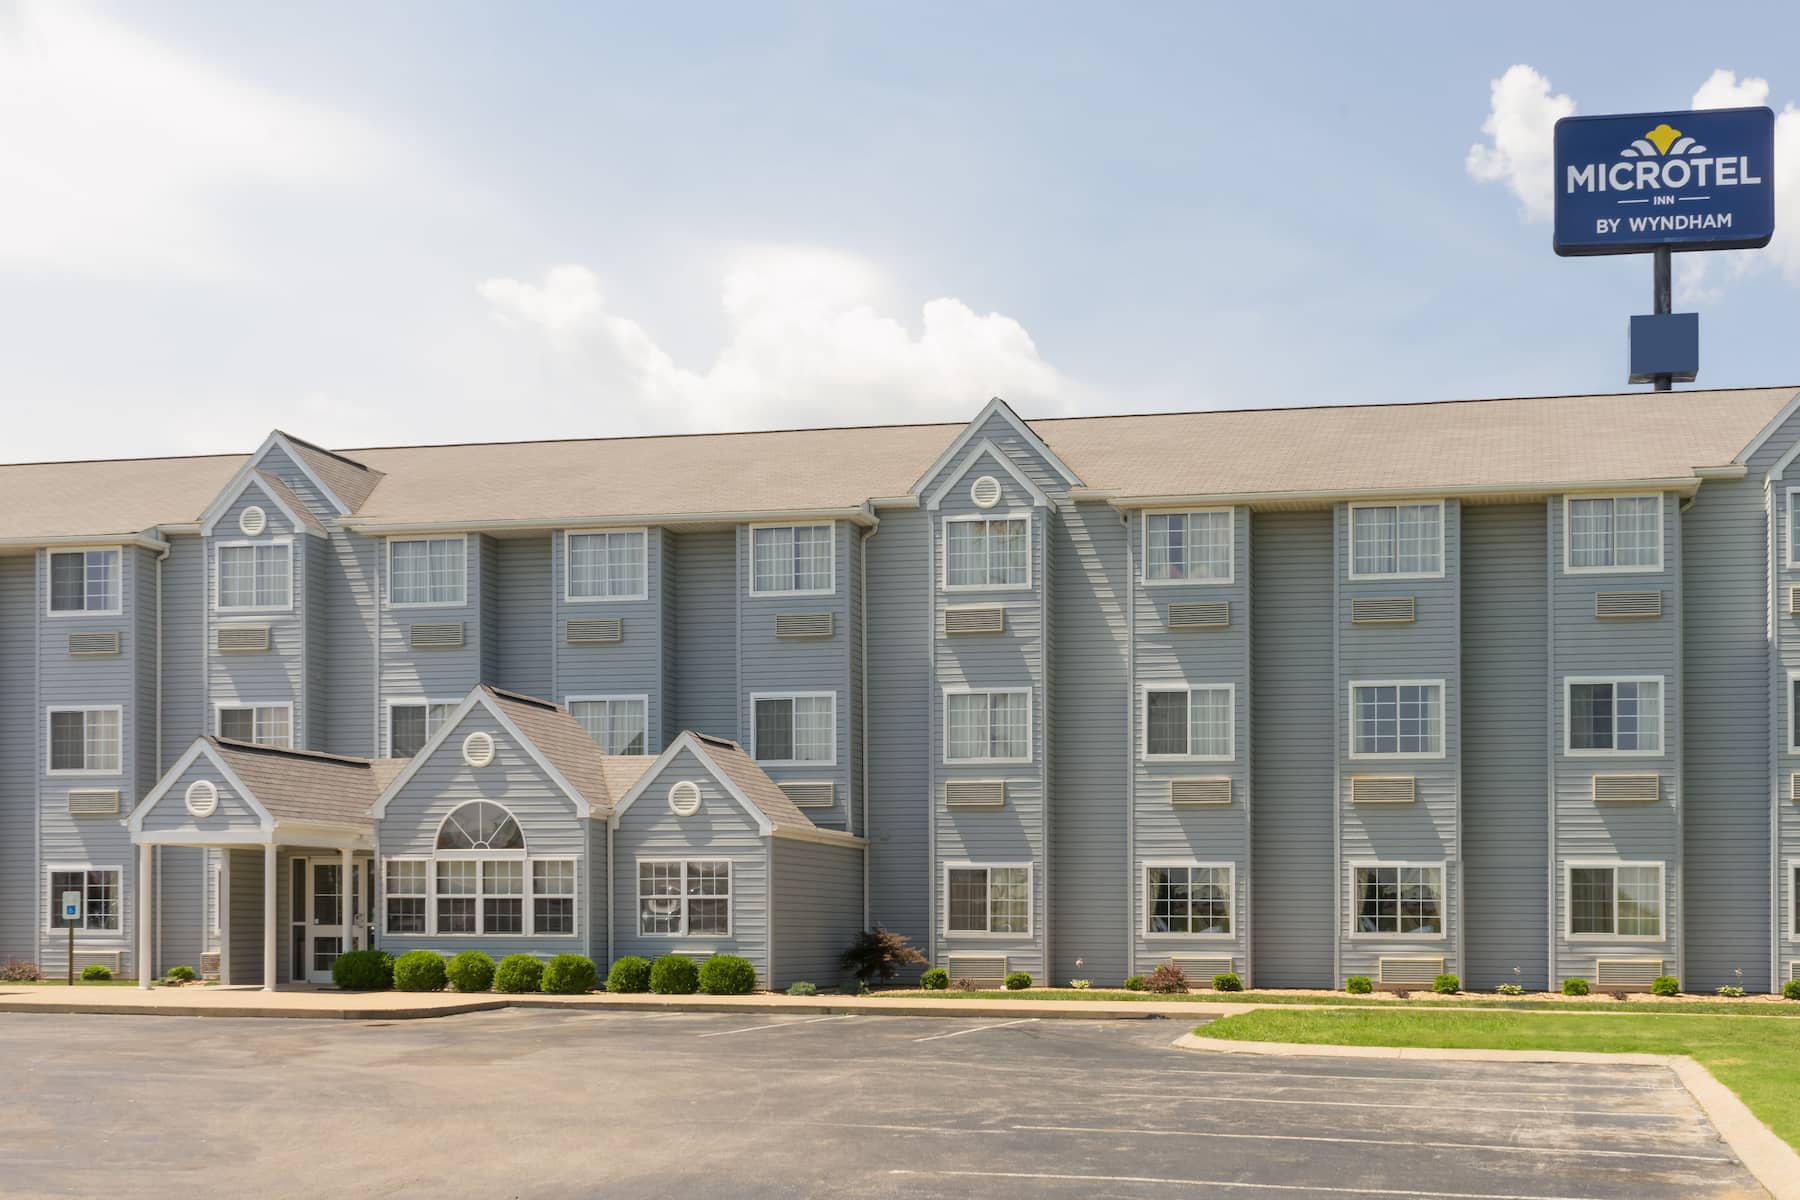 Exterior Day Image of Microtel Inn & Suites by Wyndham Bowling Green ho...